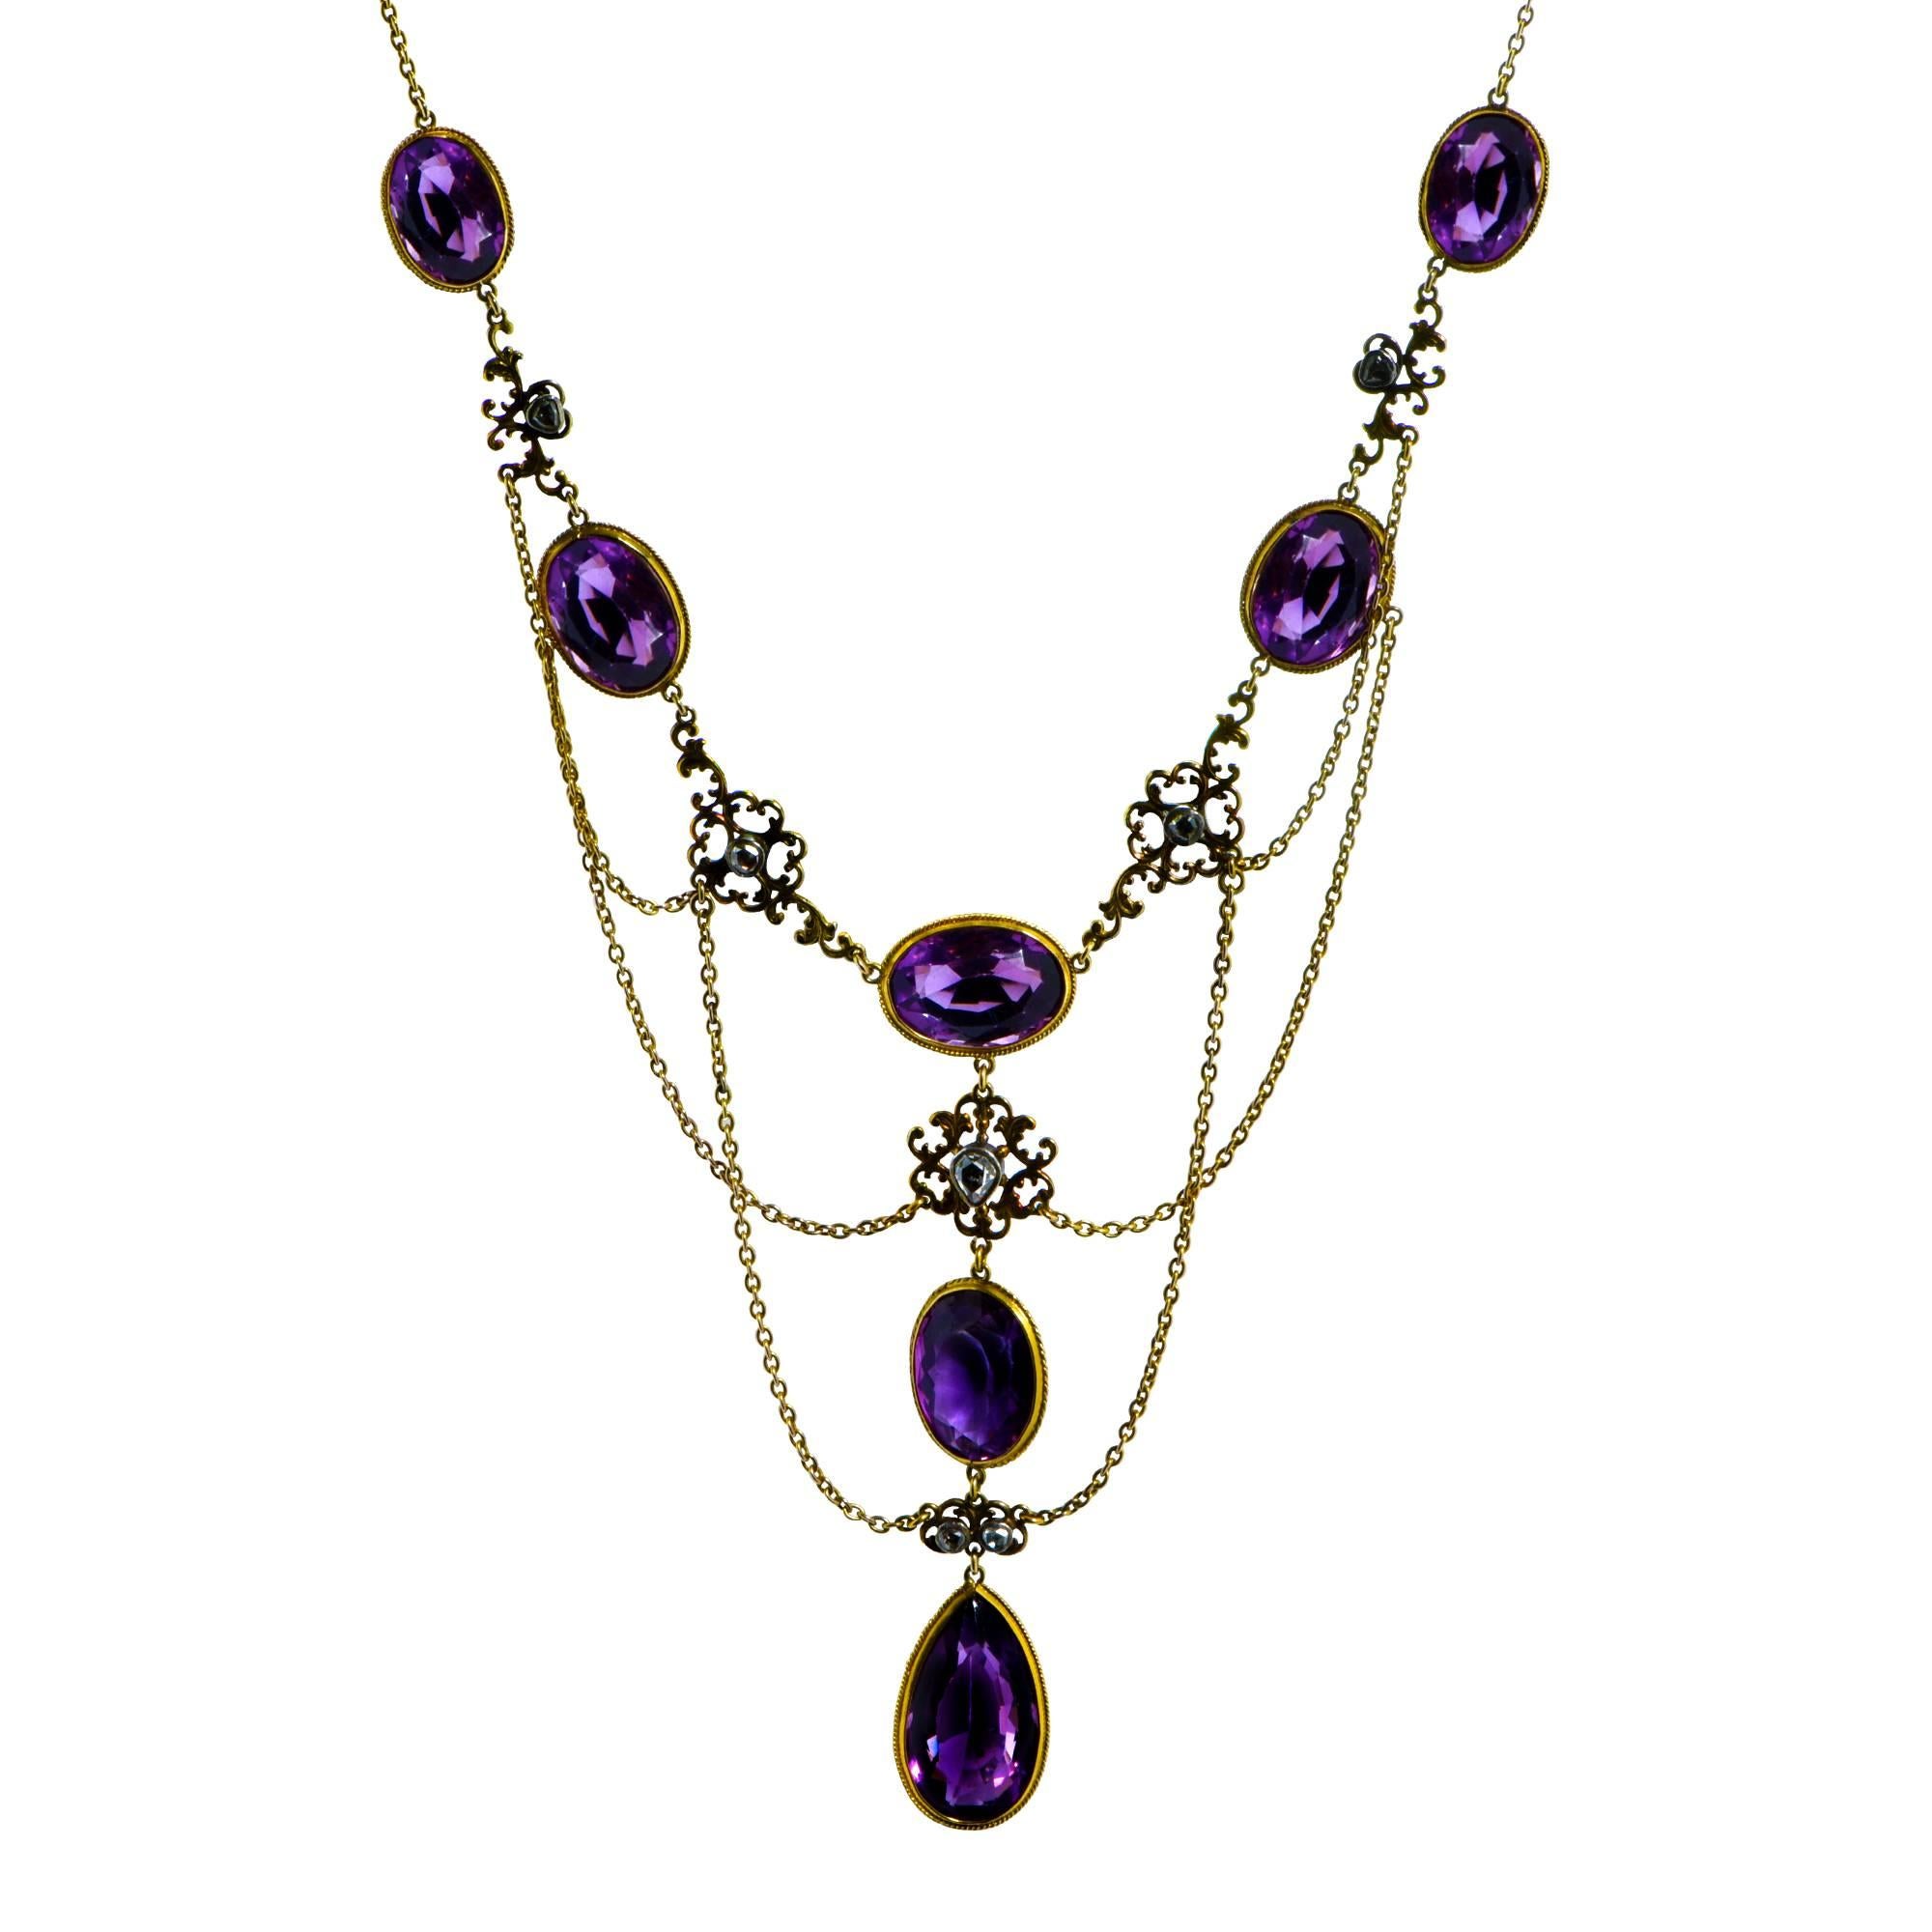 Magnificent Edwardian necklace and earring set crafted in 14 Karat Yellow gold adorned with 9 Rose Cut Diamonds J color, SI clarity weighing .50 carats total weight and 11 amethysts weighing 100 carats total weight  crafted in 14 karat yellow gold